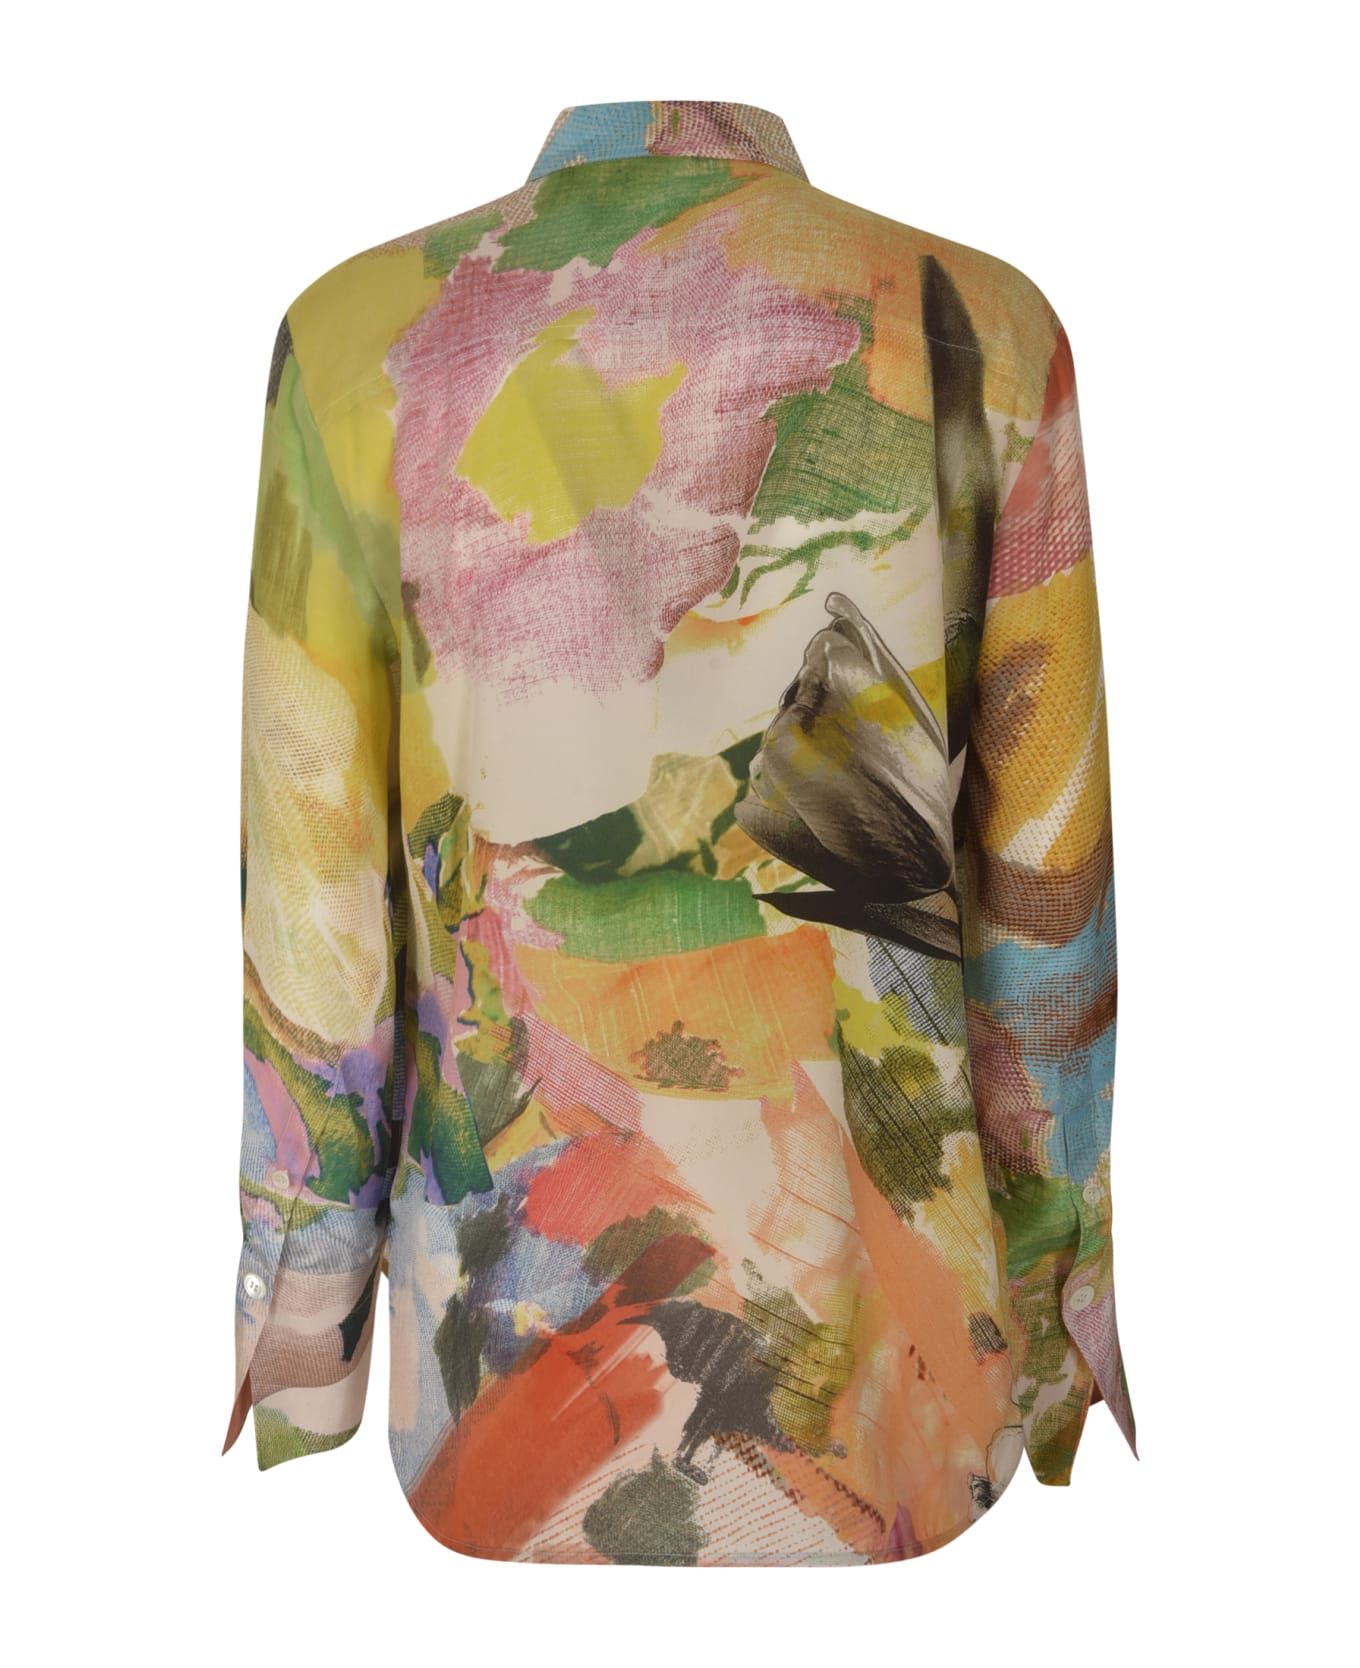 Paul Smith Round Hem All-over Printed Shirt - Multicolor